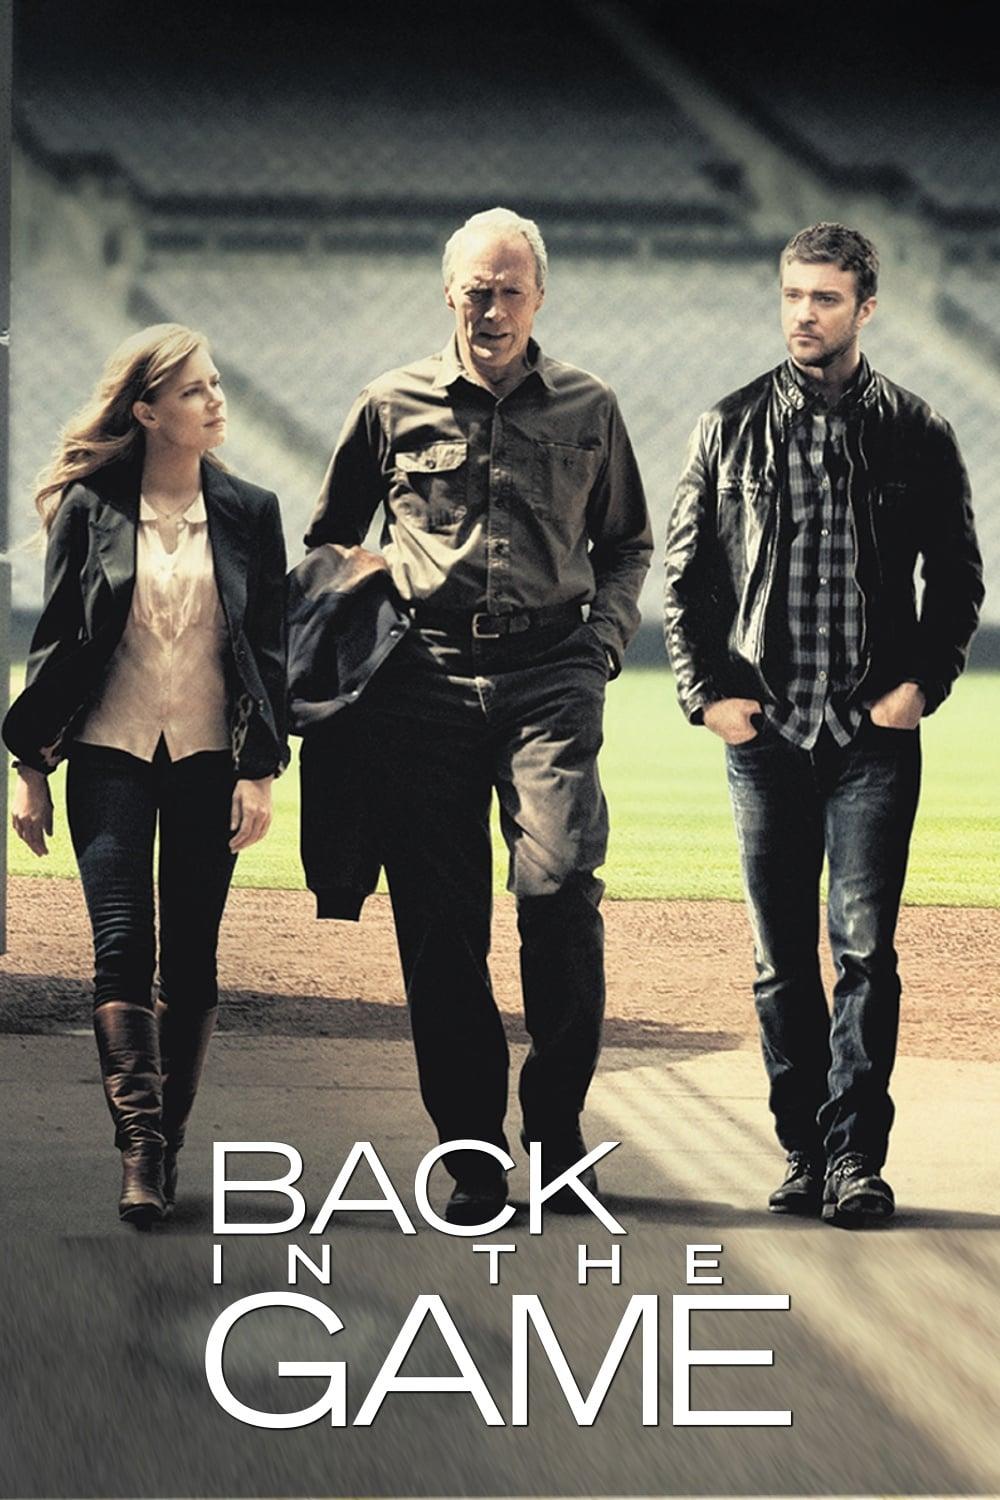 Back in the Game poster